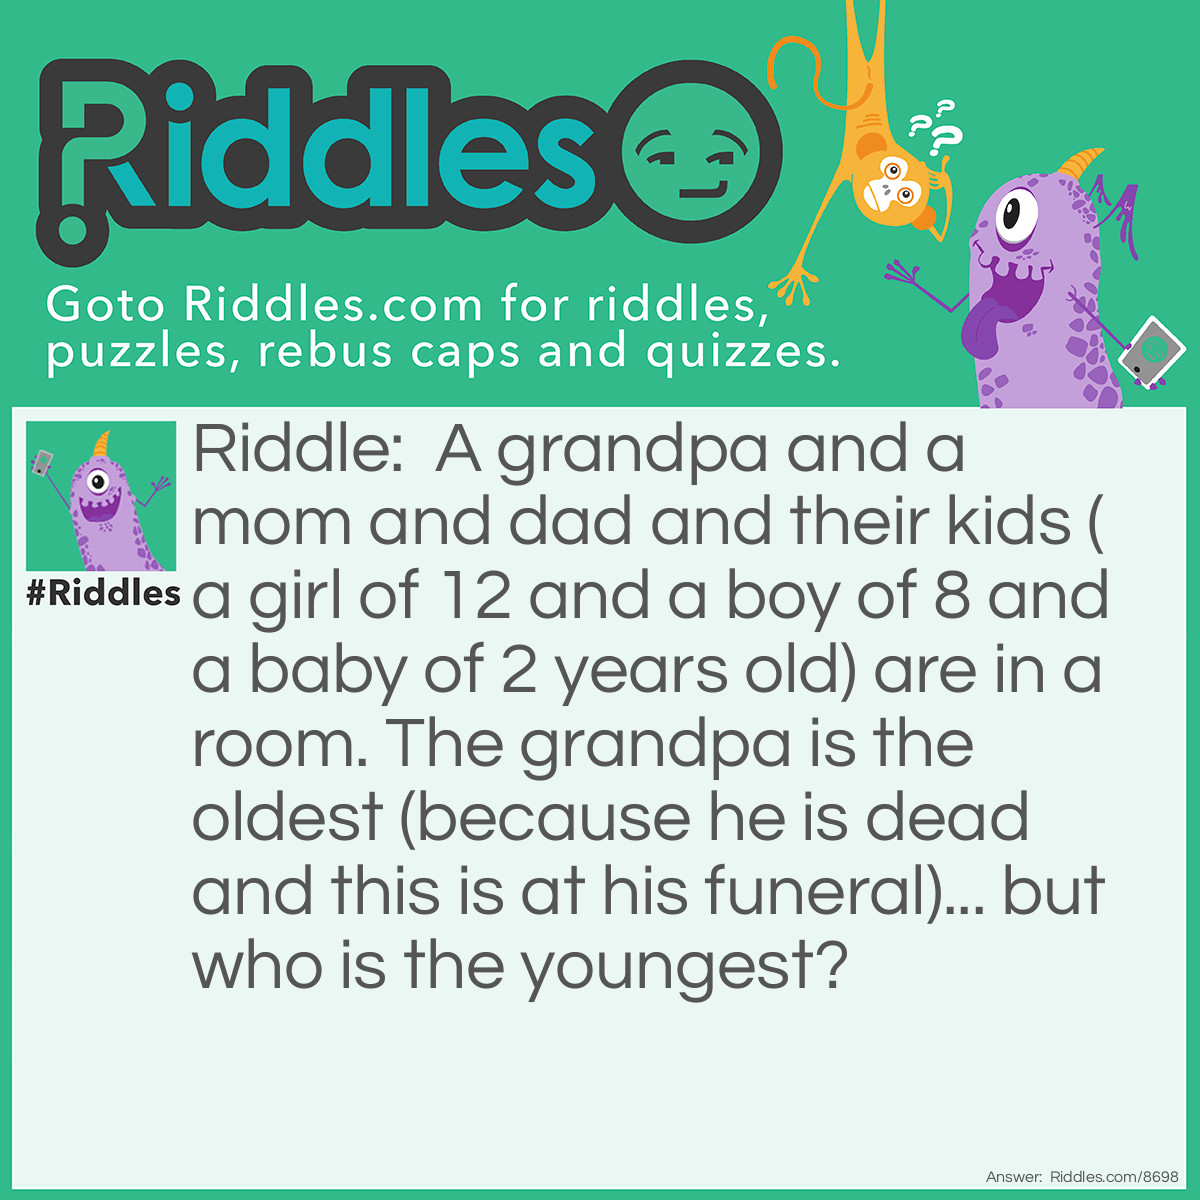 Riddle: A grandpa and a mom and dad and their kids (a girl of 12 and a boy of 8 and a baby of 2 years old) are in a room. The grandpa is the oldest (because he is dead and this is at his funeral)... but who is the youngest? Answer: The grandpa... because he is a baby ghost now!